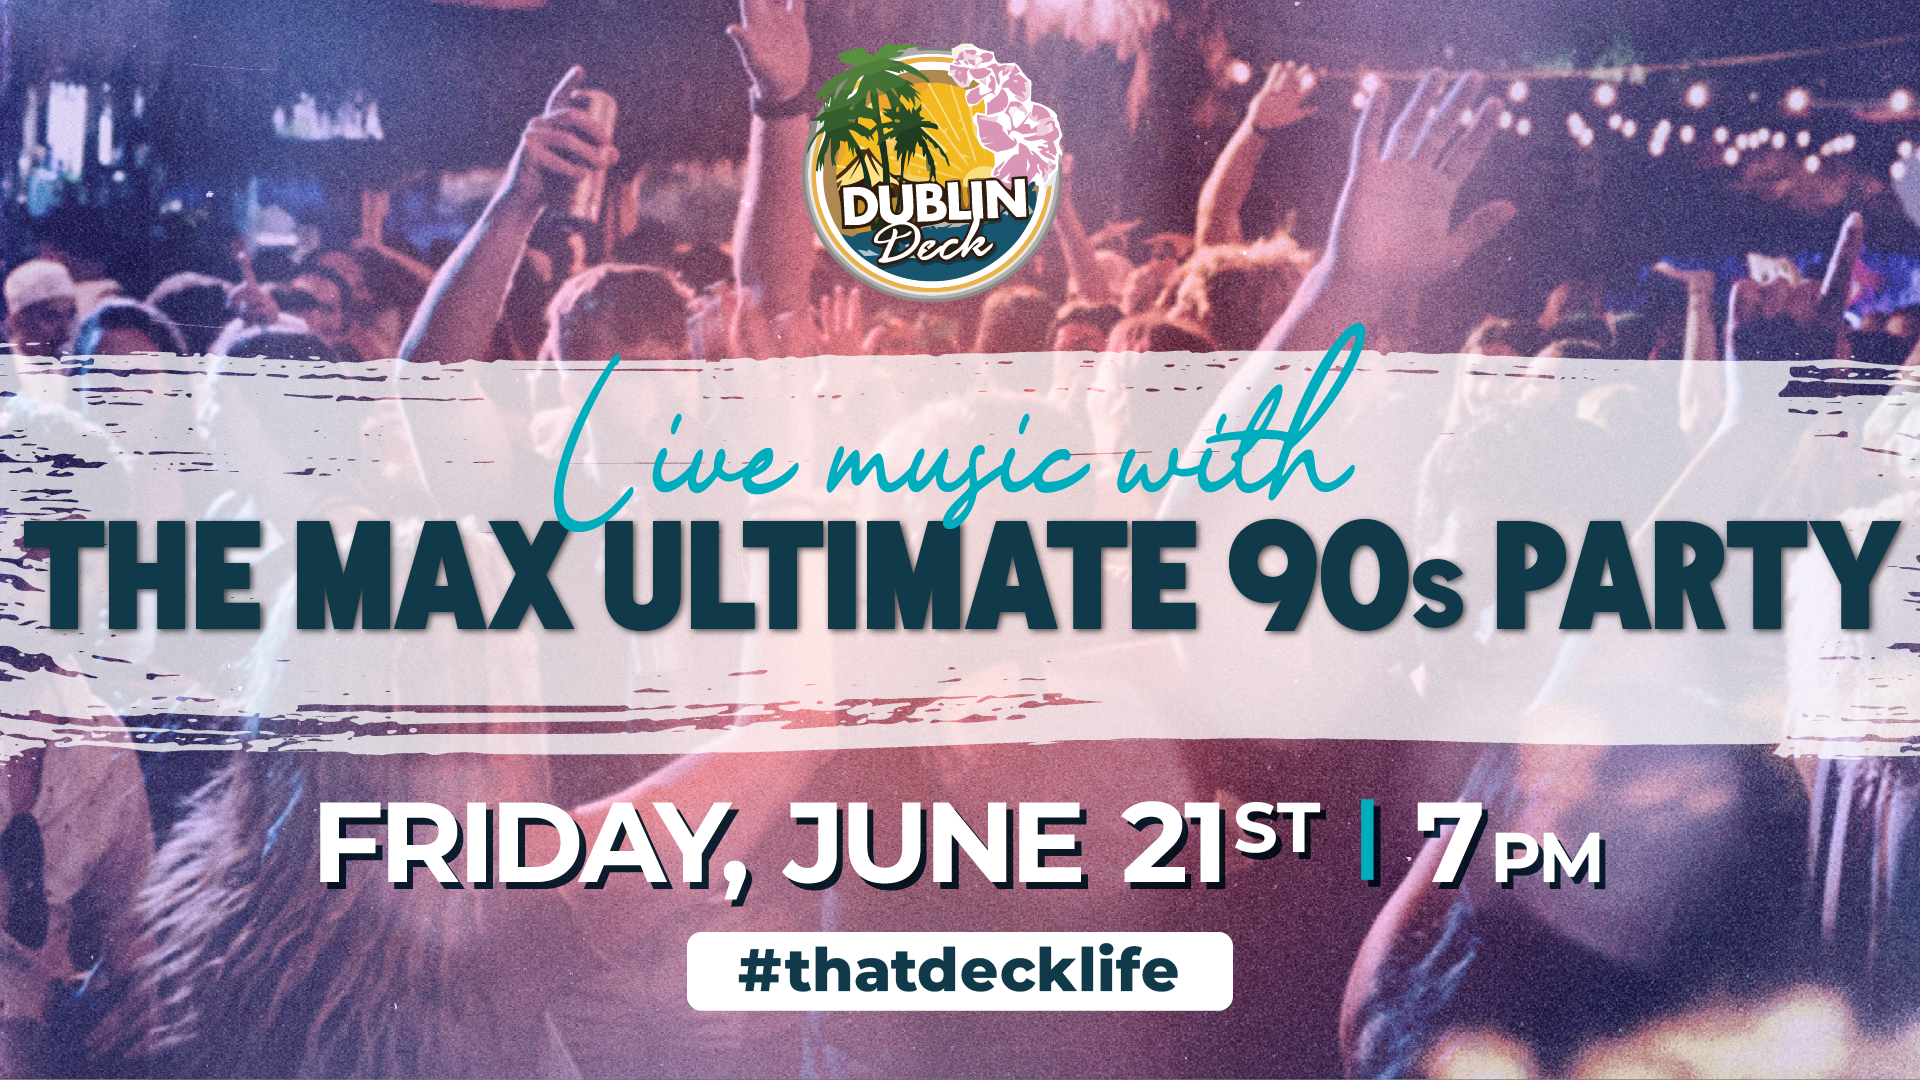 flyer for live music by The Max Ultimate 90’s Party on june 21 at 7pm